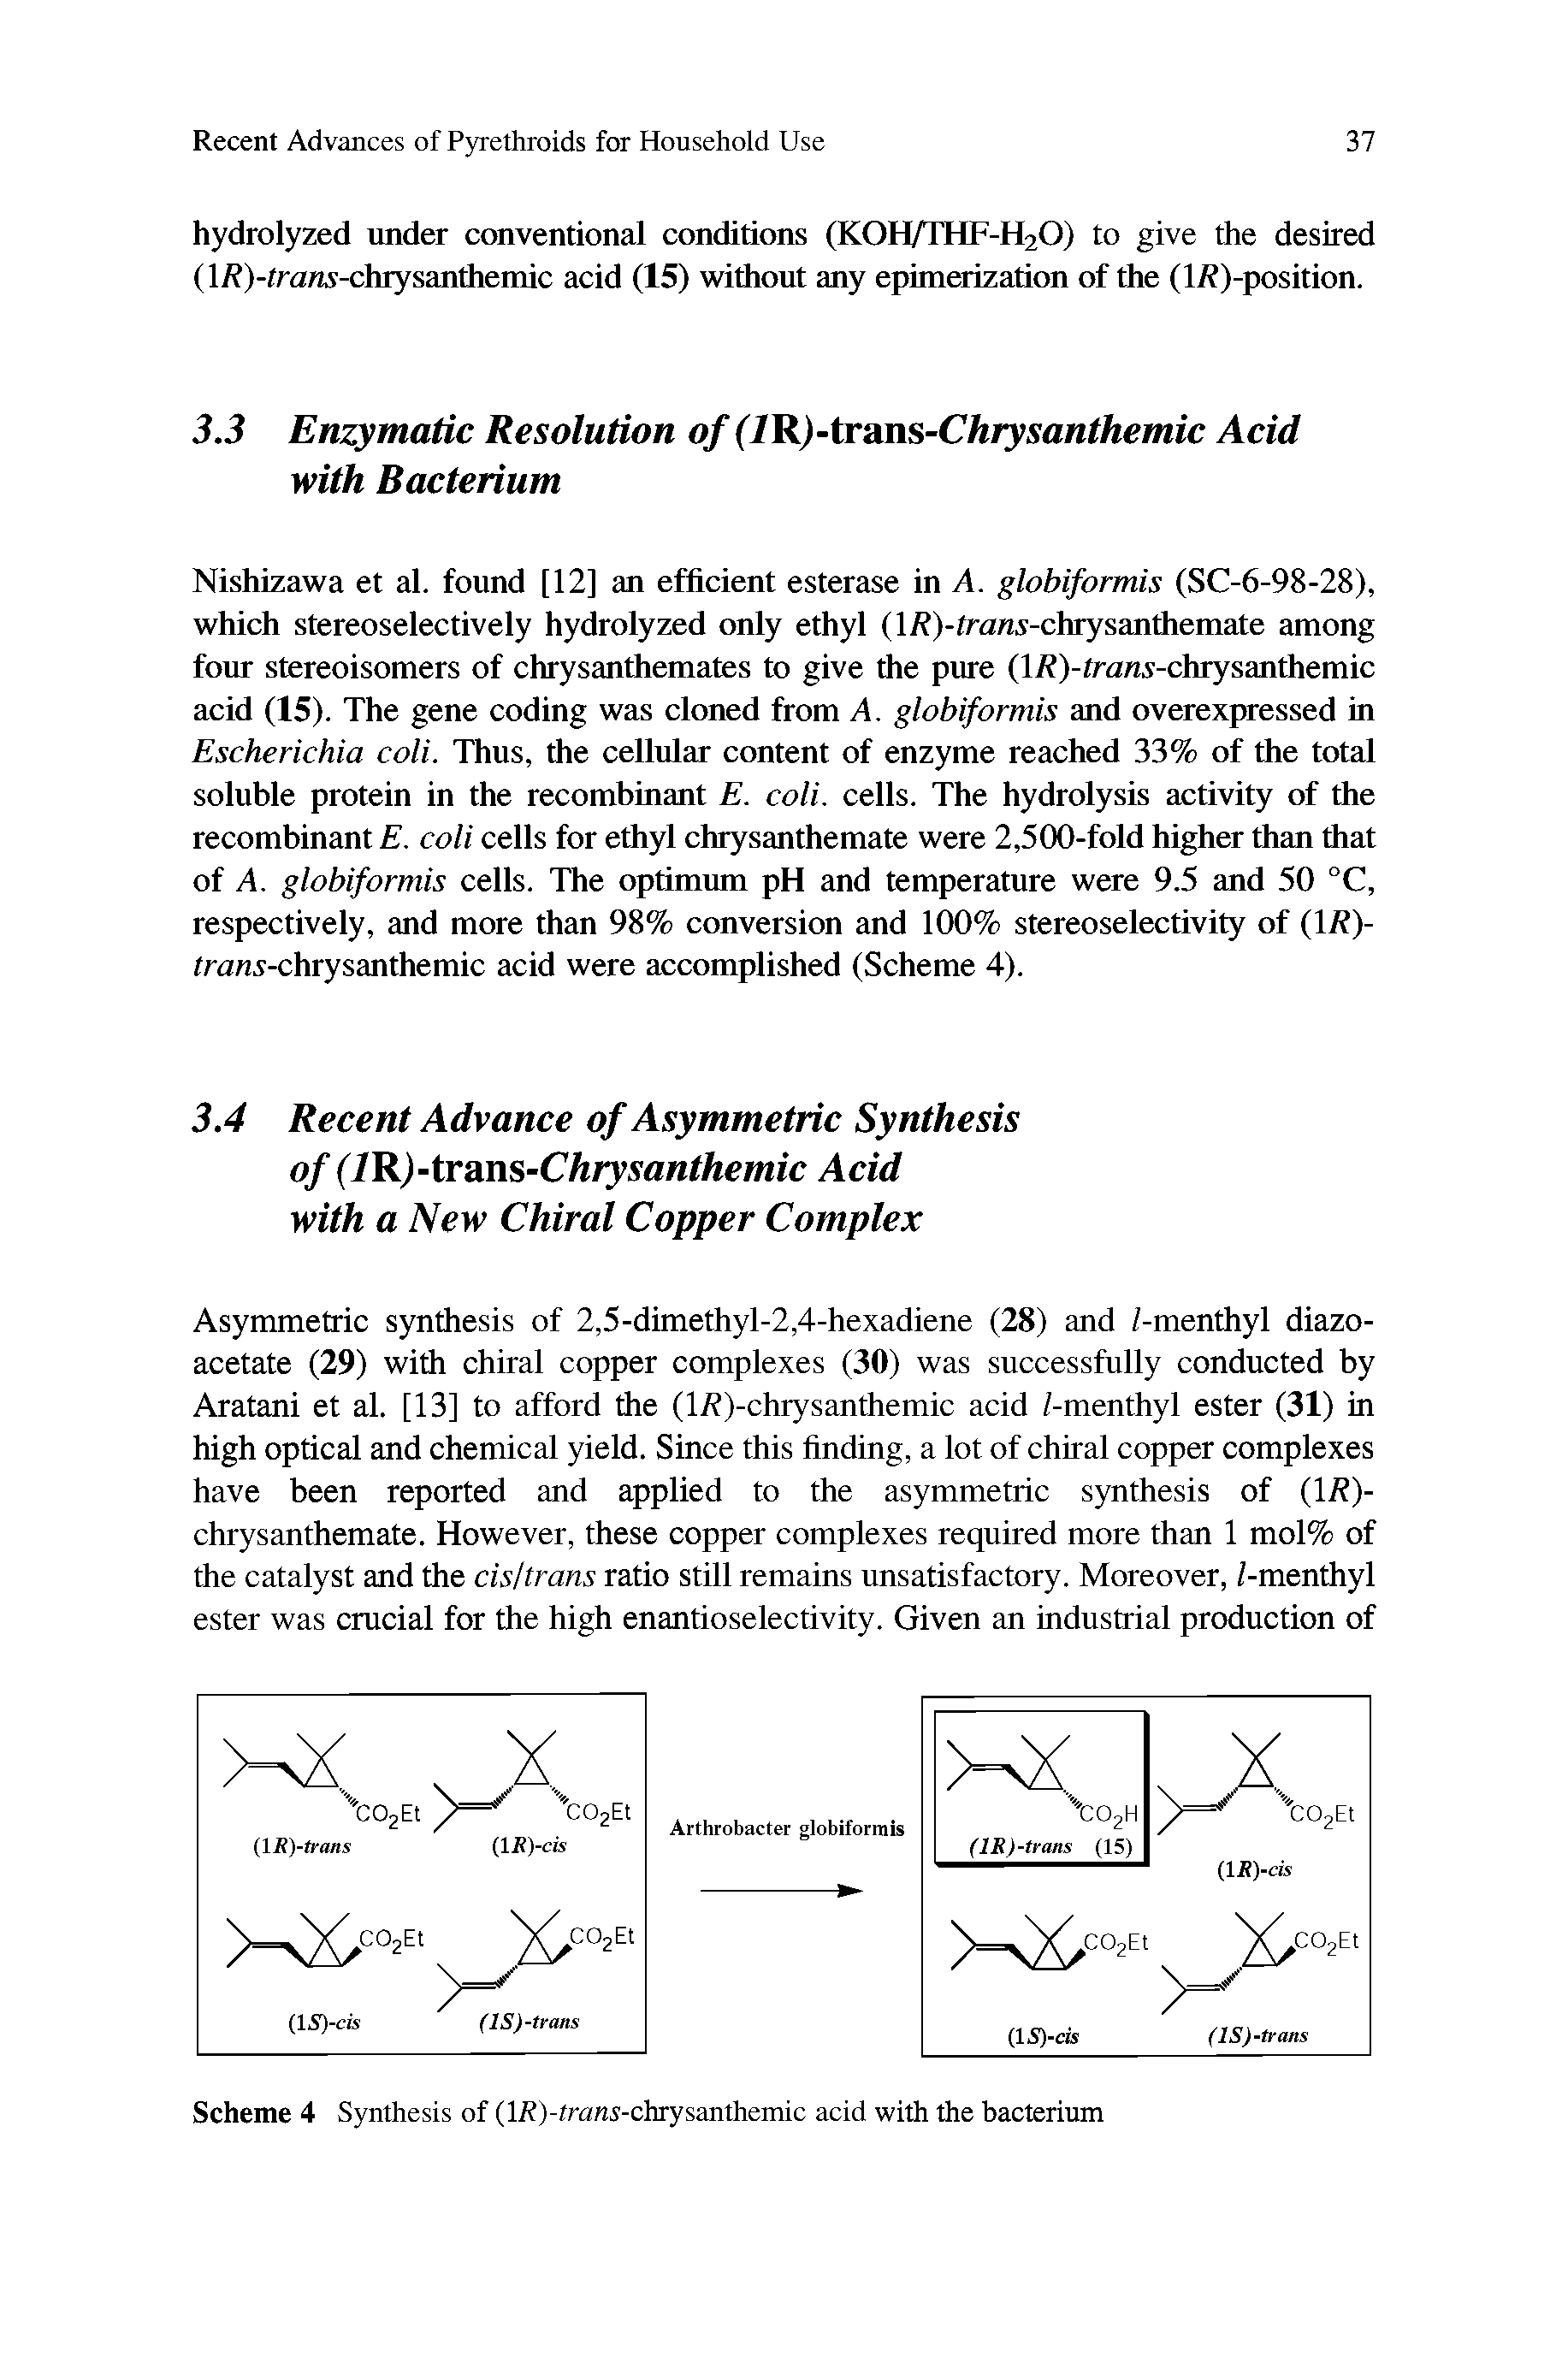 Scheme 4 Synthesis of (lR)-trans-chrysanthemic acid with the bacterium...